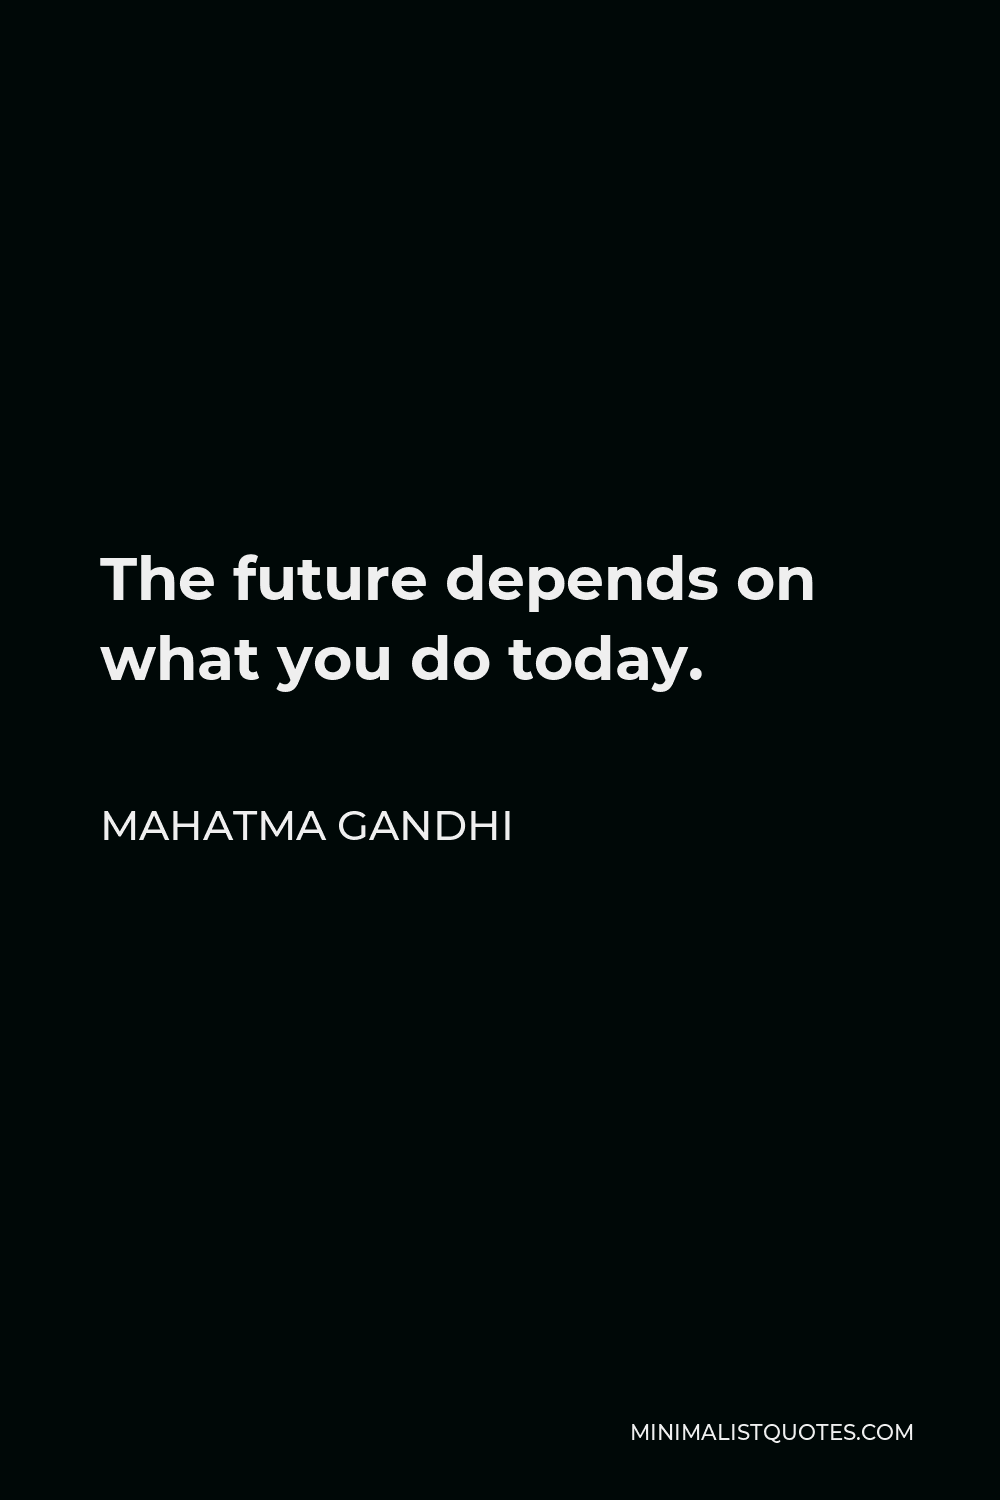 Mahatma Gandhi Quote - The future depends on what you do today.